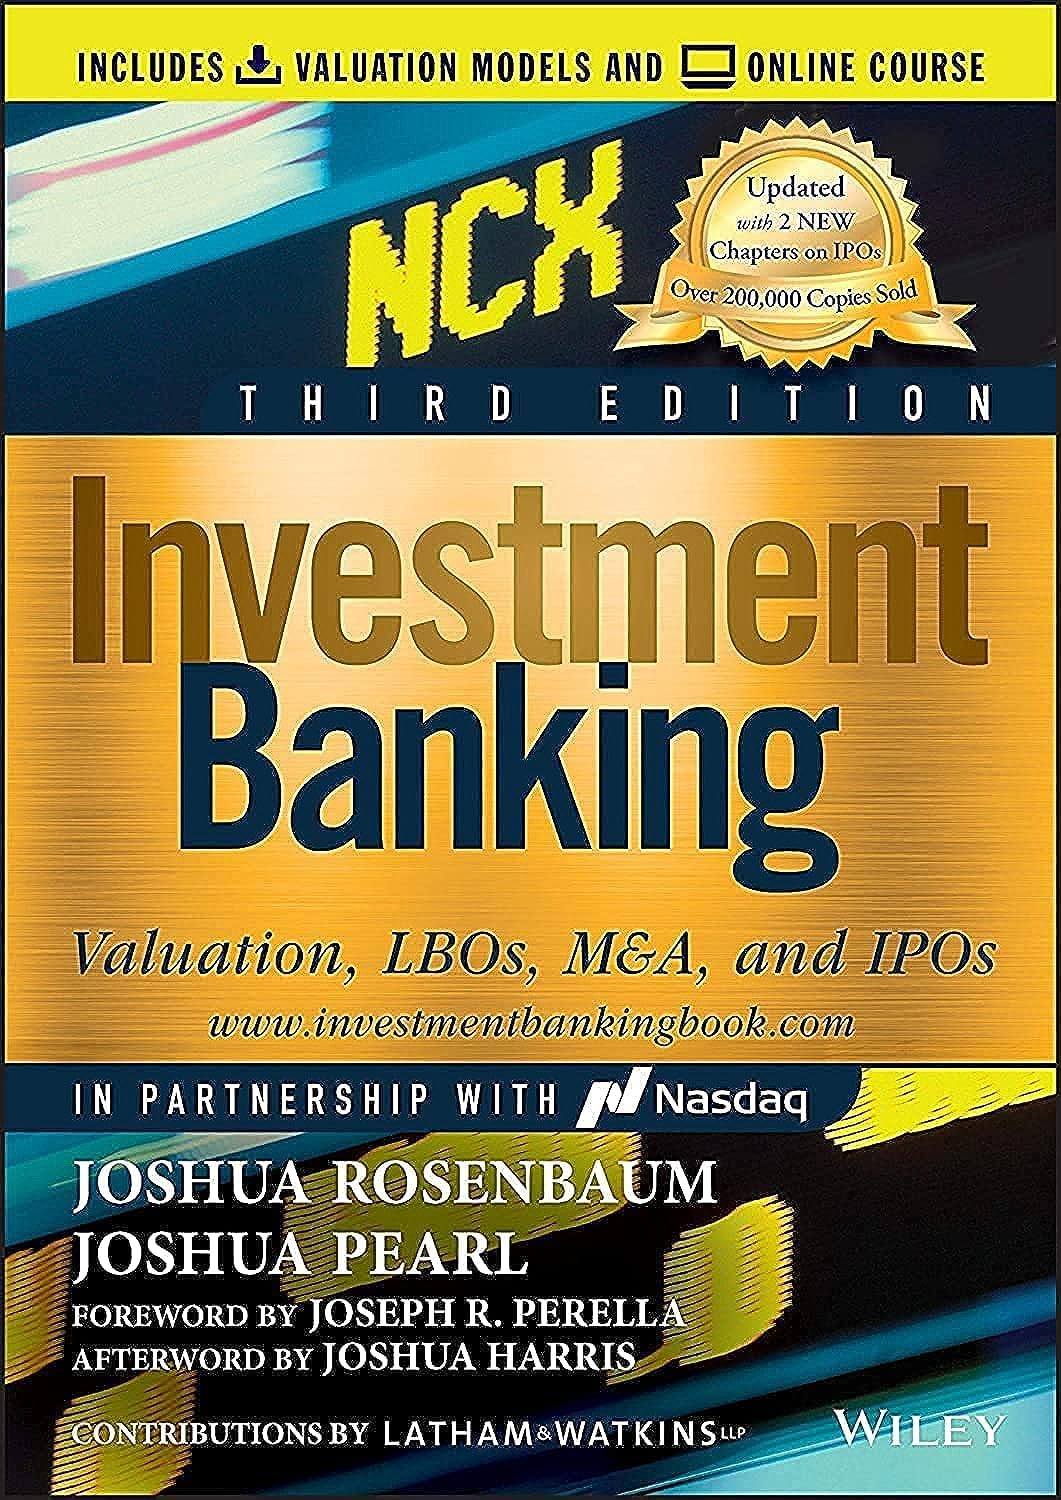 practice test bank and exam questions for Investment Banking Valuation, LBOs, M&A, and IPOs" by Joshua Rosenbaum.